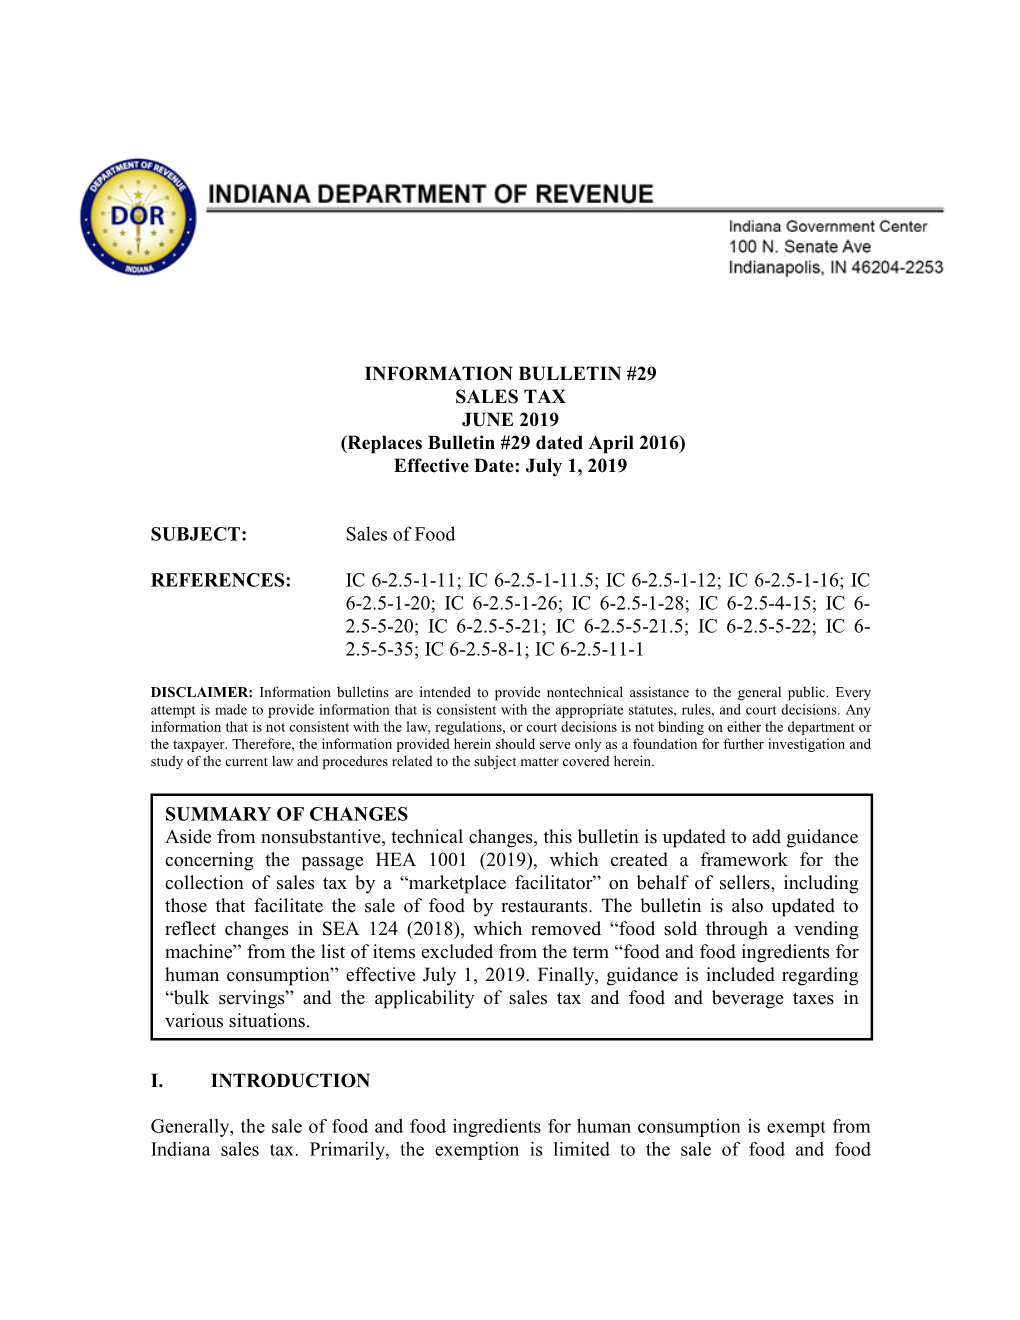 Sales Tax Information Bulletin #29 Page 2